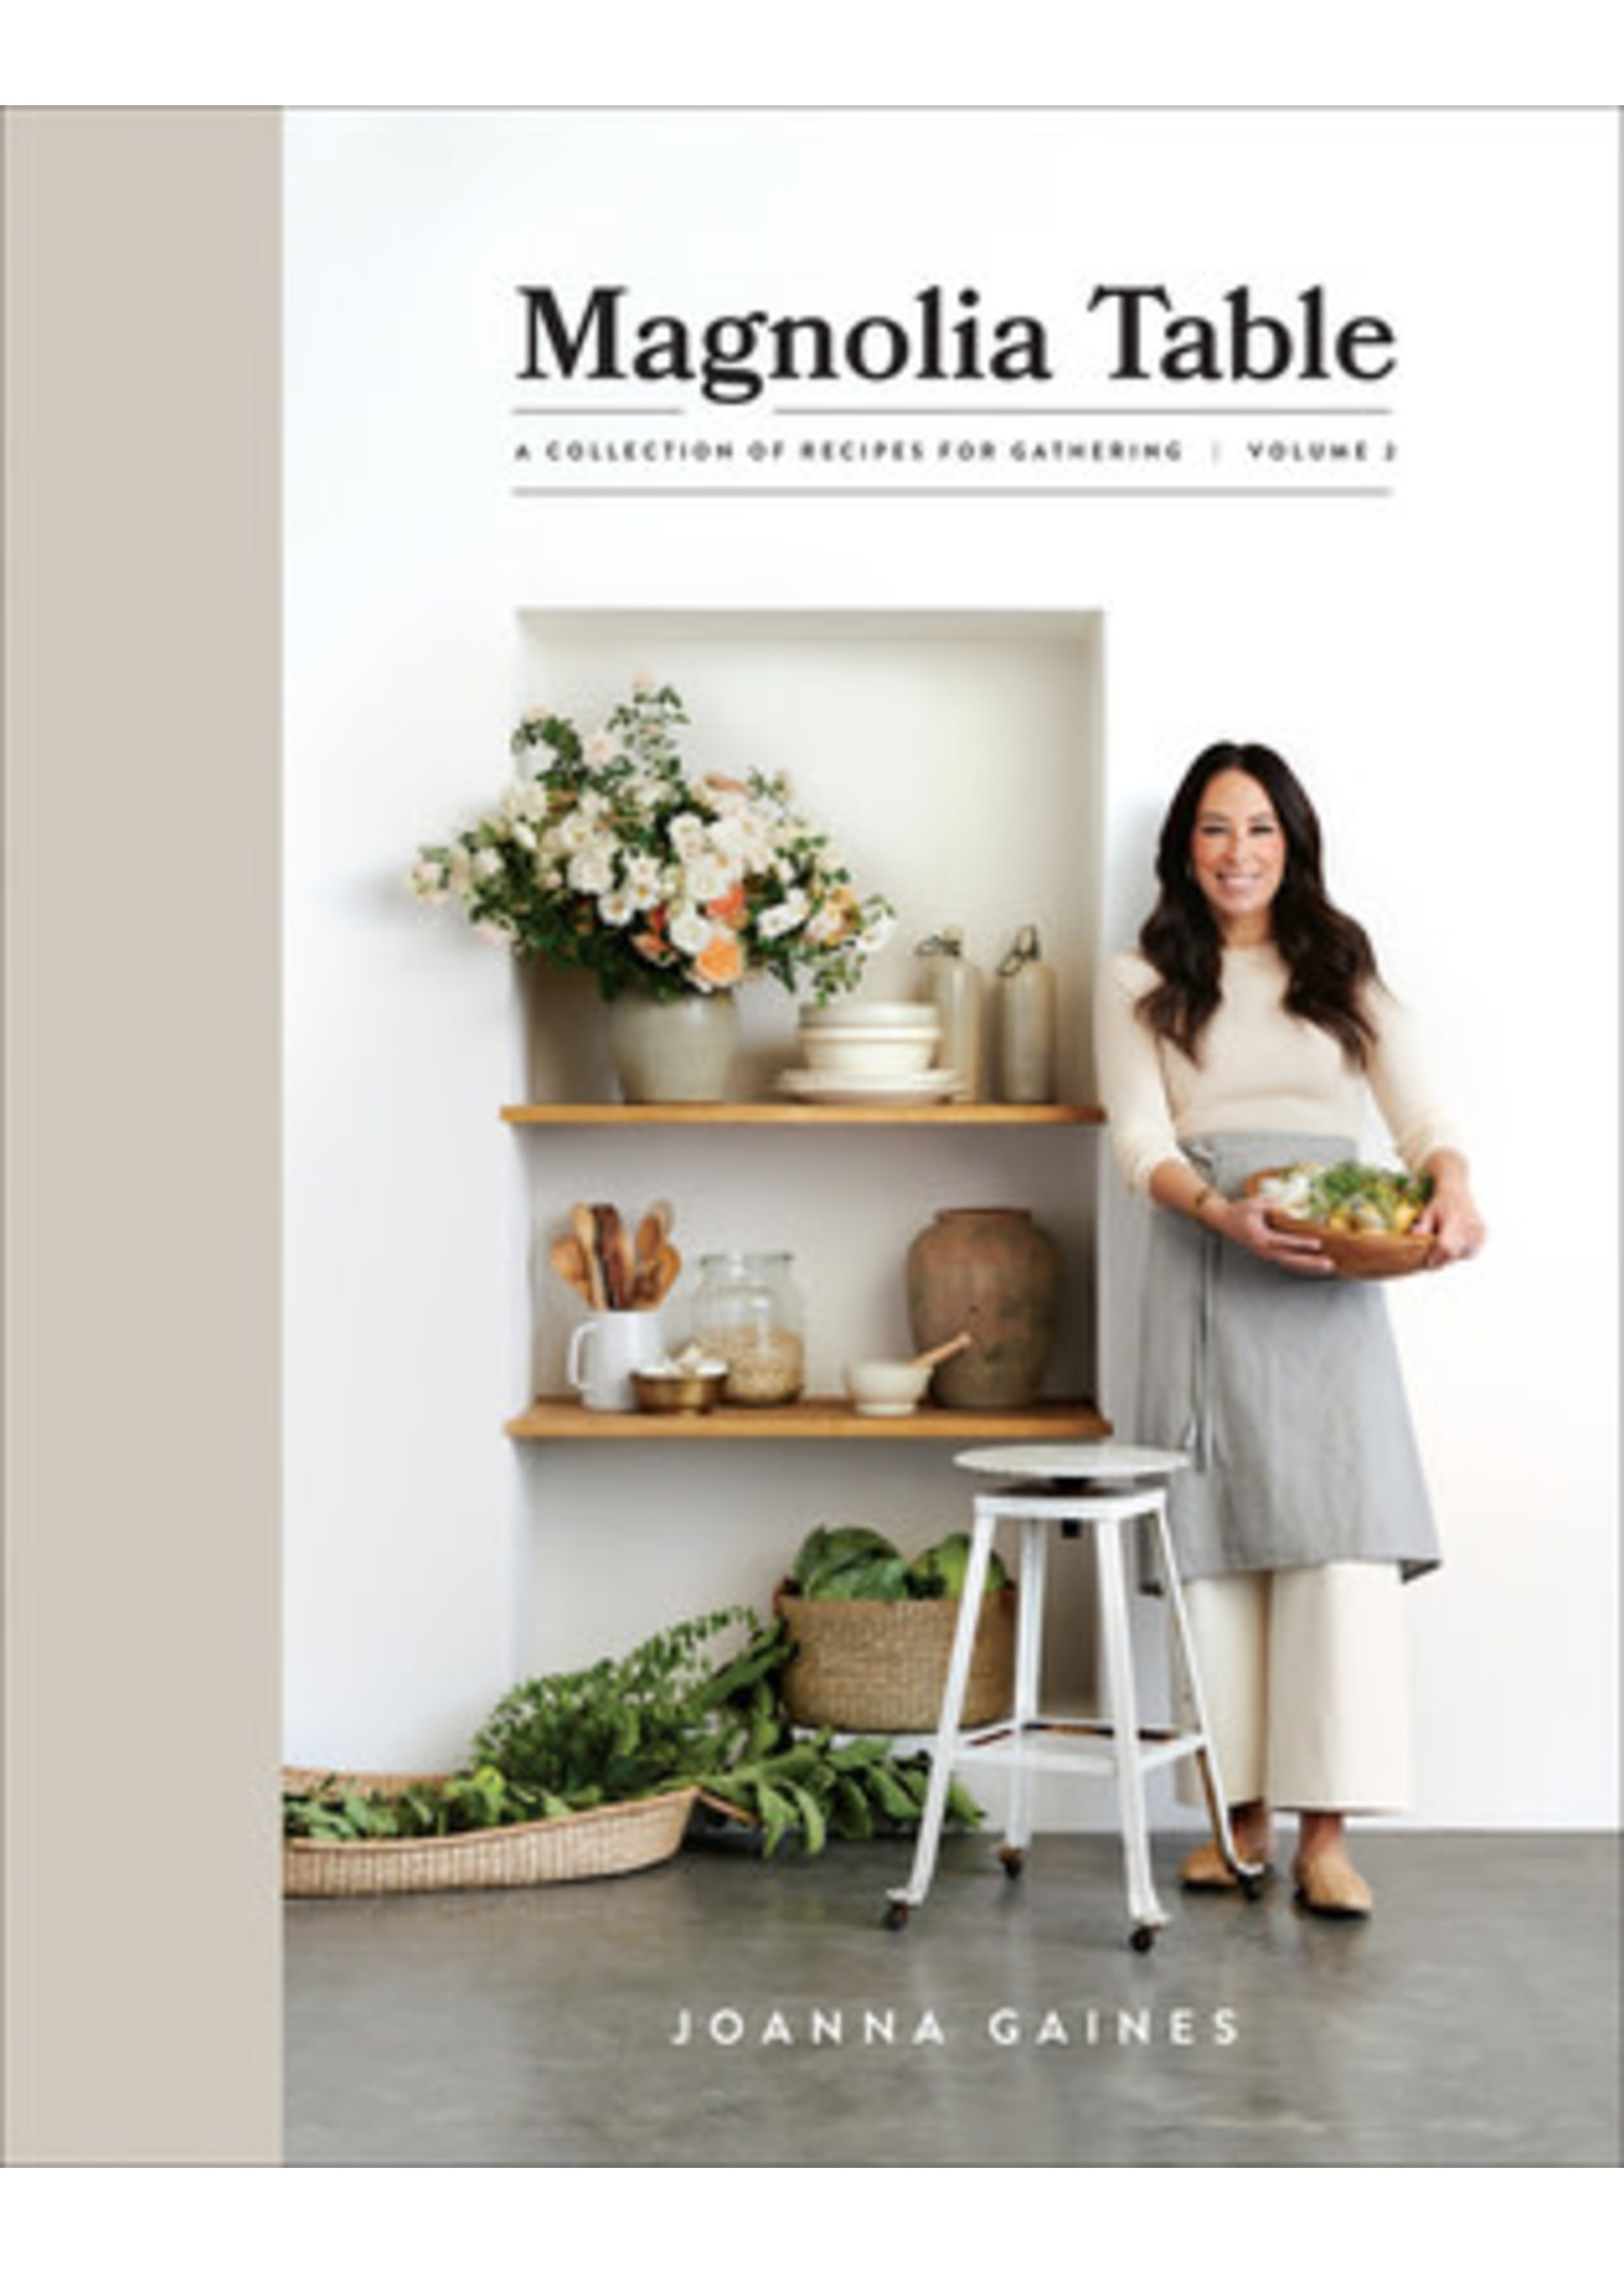 Magnolia Table: A Collection of Recipes for Gathering, Volume 2 by Joanna Gaines